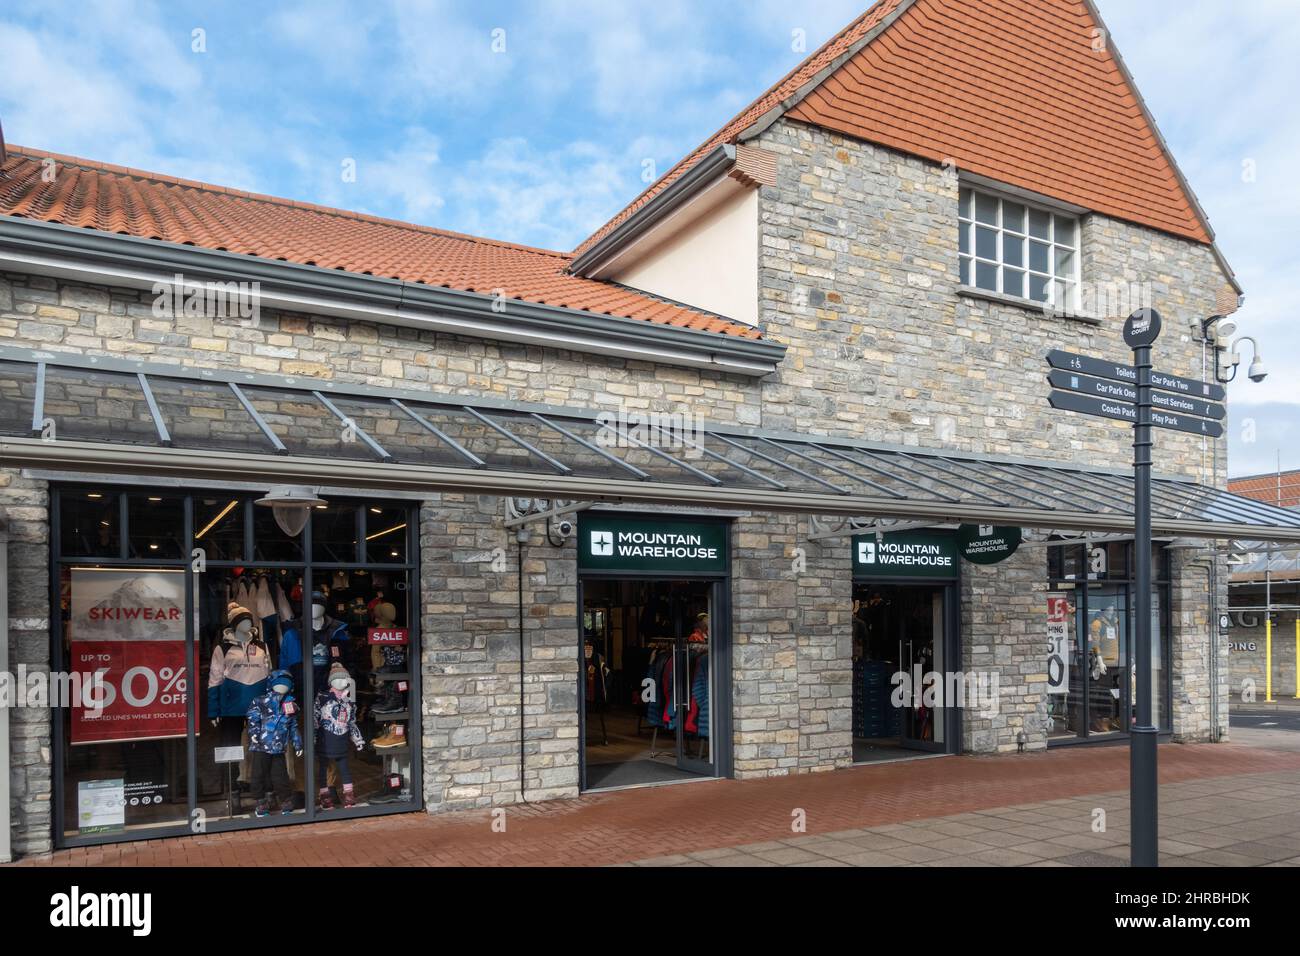 Mountain Warehouse store selling Outdoor Clothing & Equipment, Clarks Village Outlet Shopping, Street, Somerset, England, UK Stock Photo